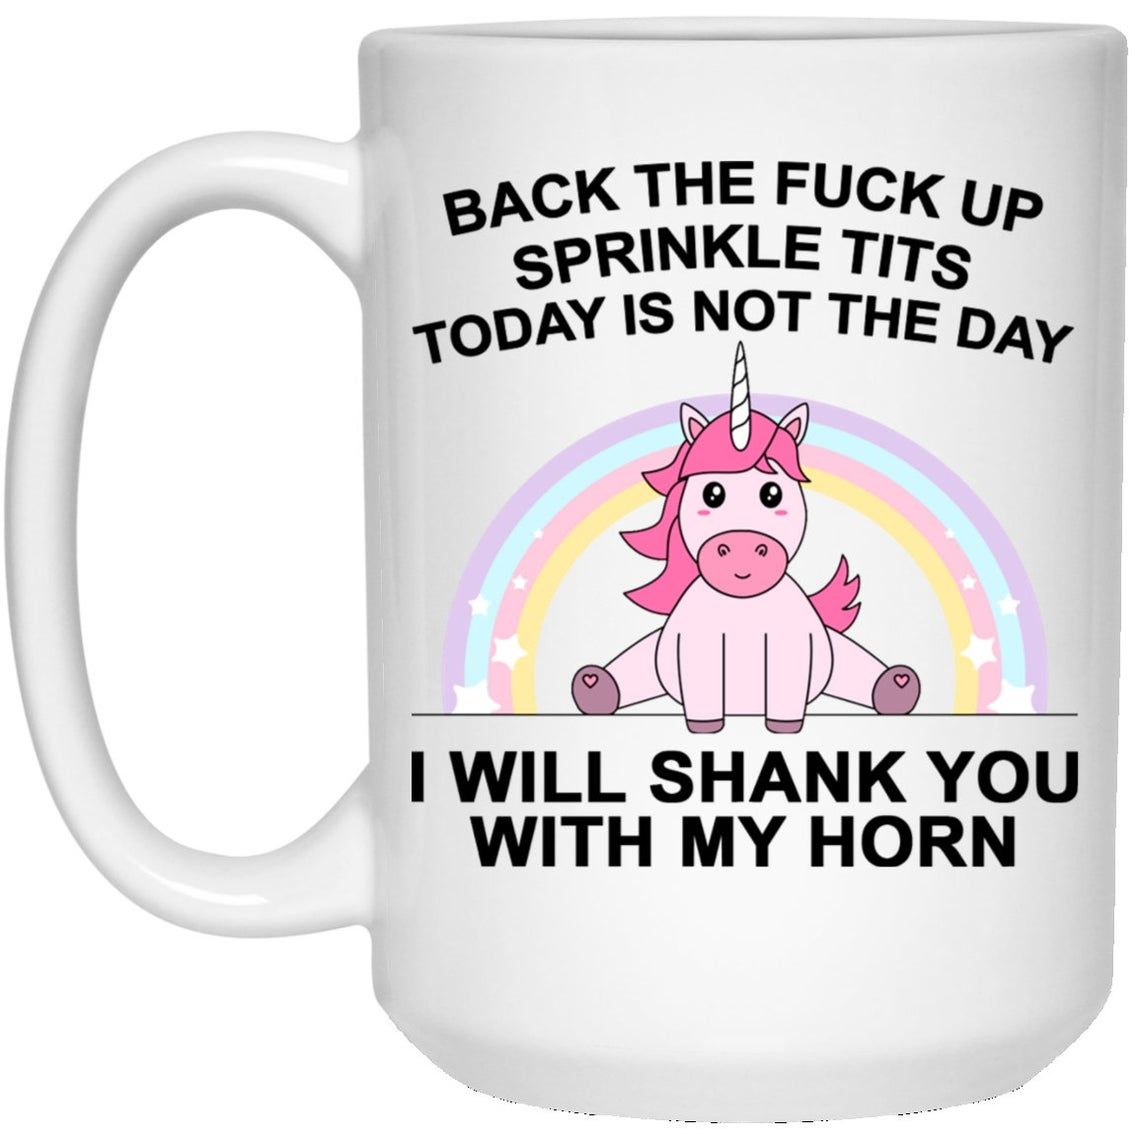 Back the fuck up sprinkle tits today is not the day coffee mug Style: 15oz Mug, Color: White